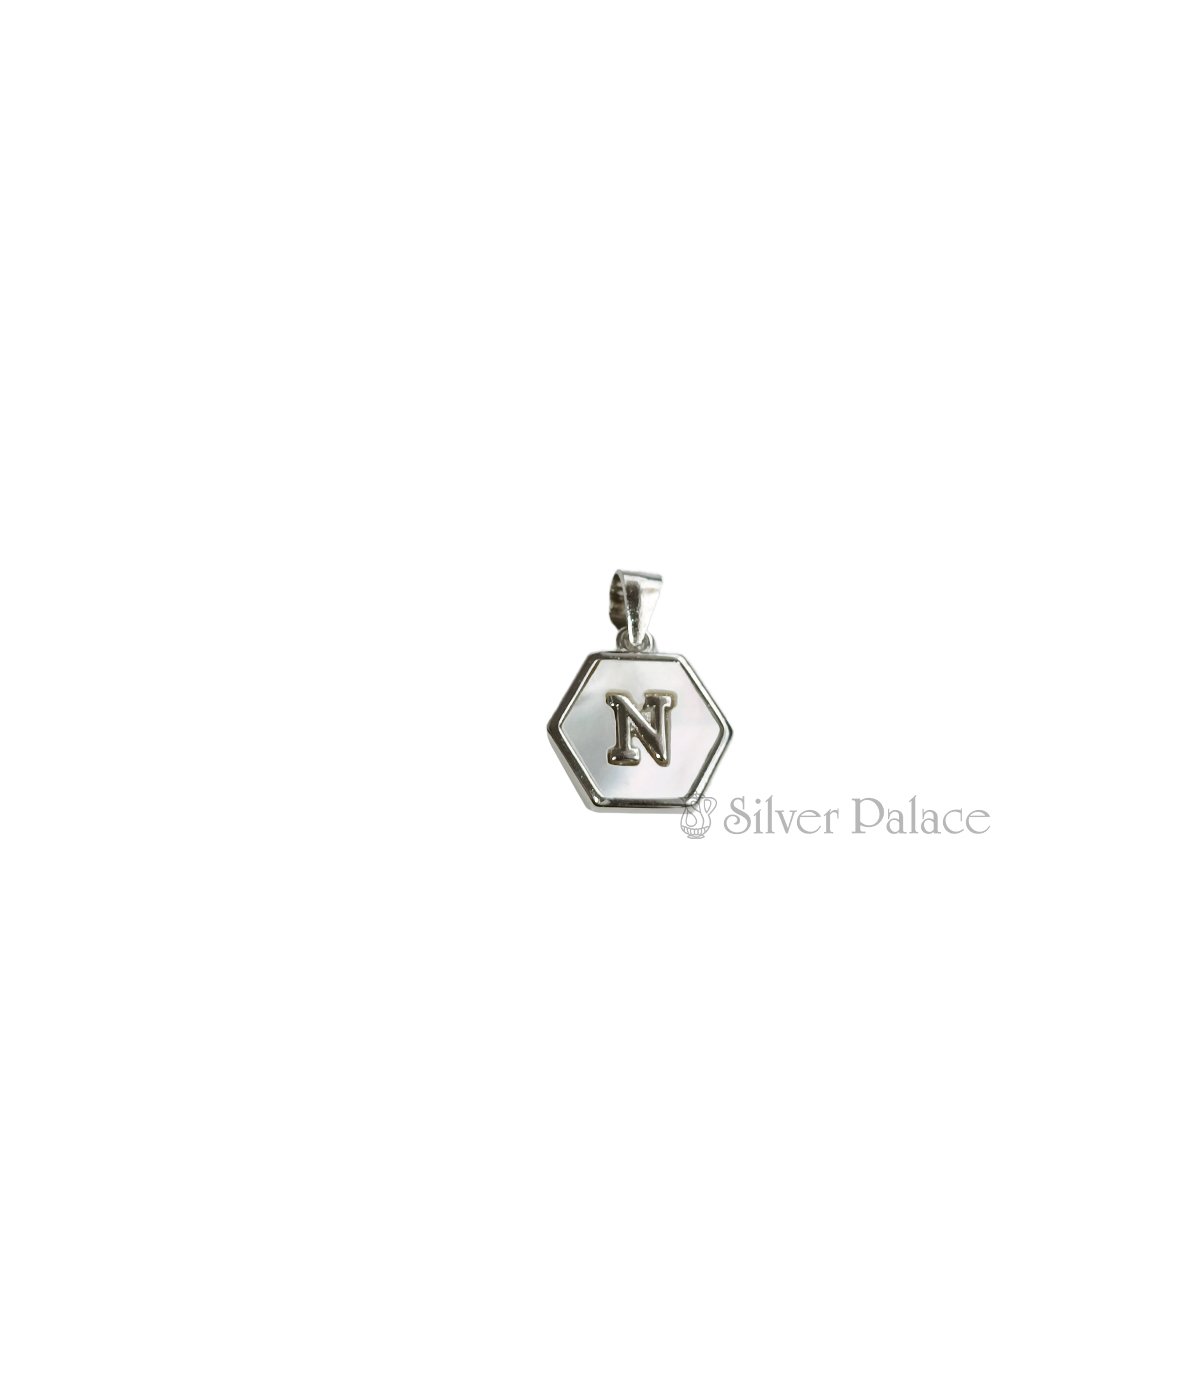 92.5 STERLING SILVER INITIAL LETTER N PENDANT